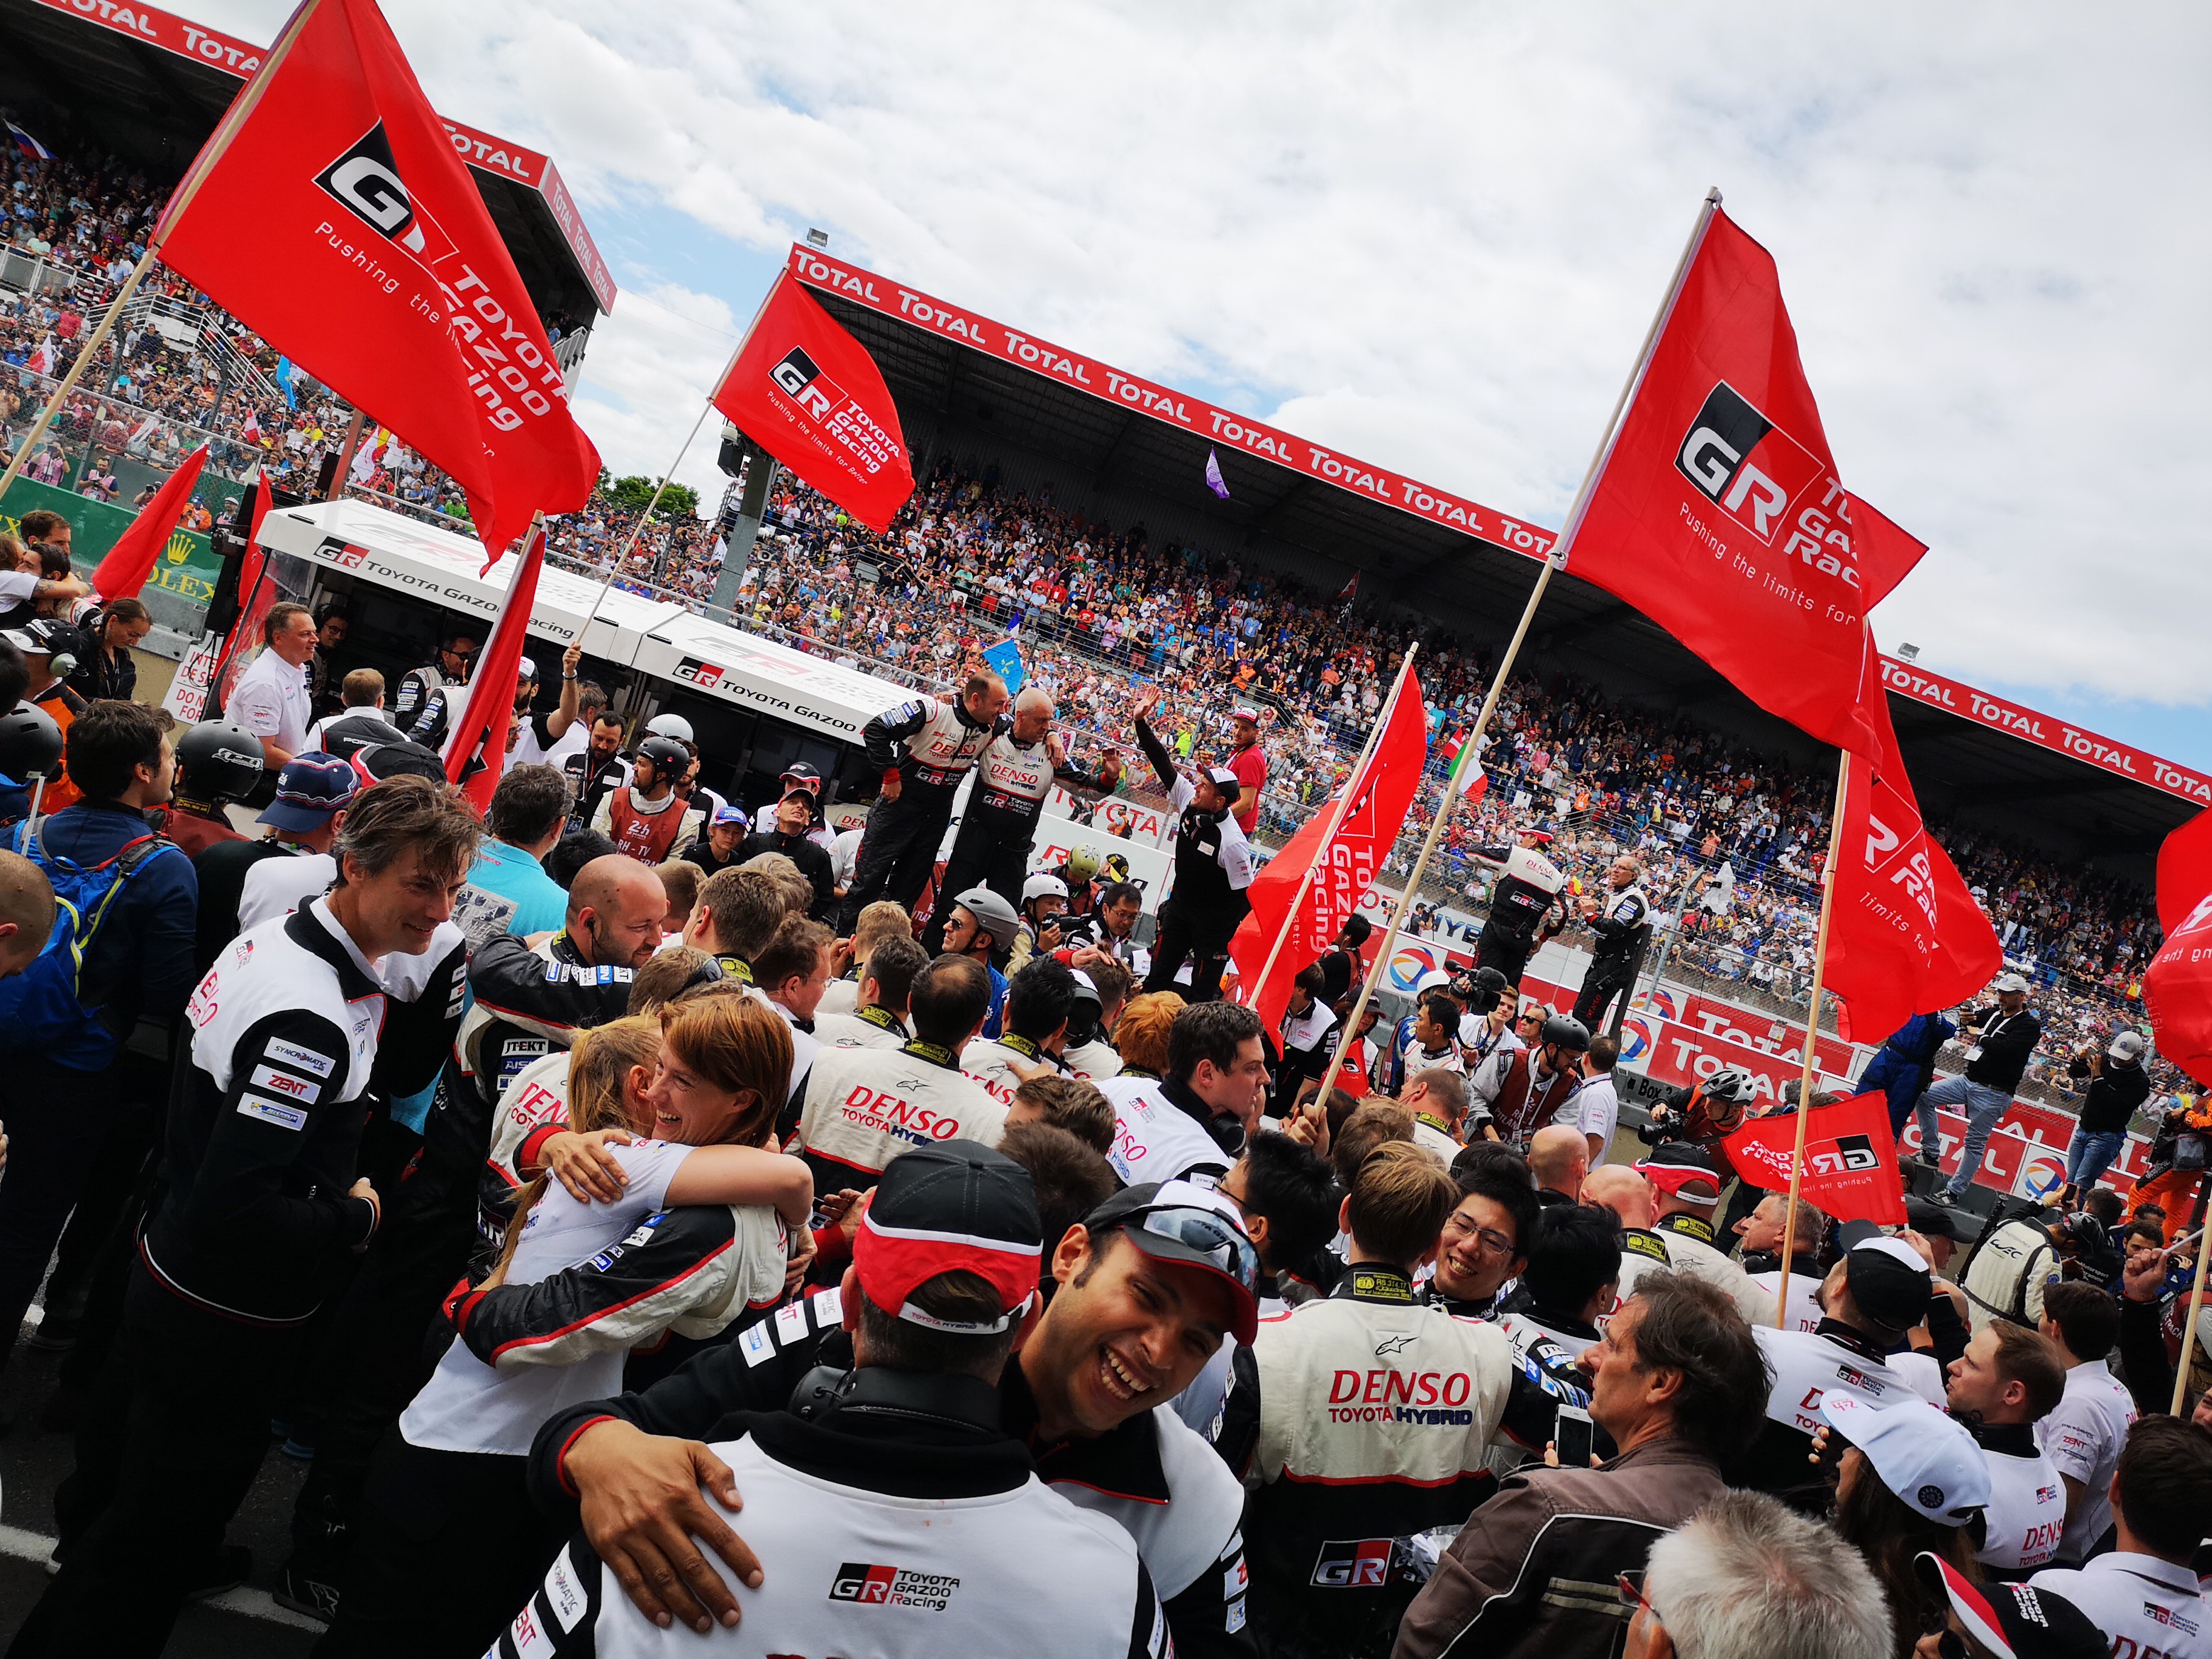 2018 Le Mans 24 Hours - post-race atmosphere in pitlane and podium